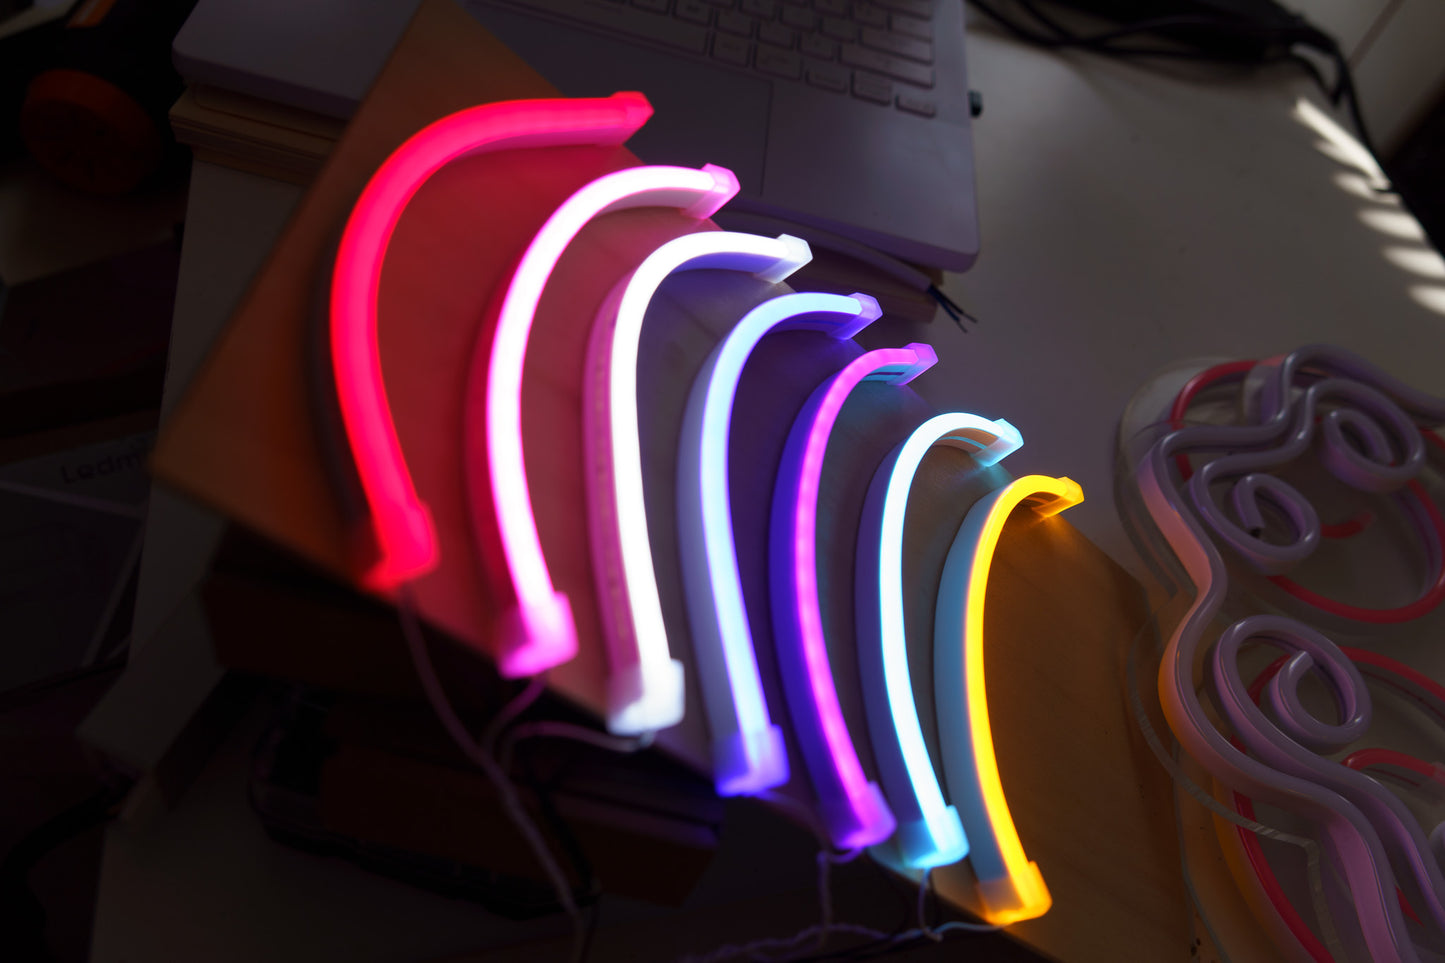 Customize Your Own LED Sign